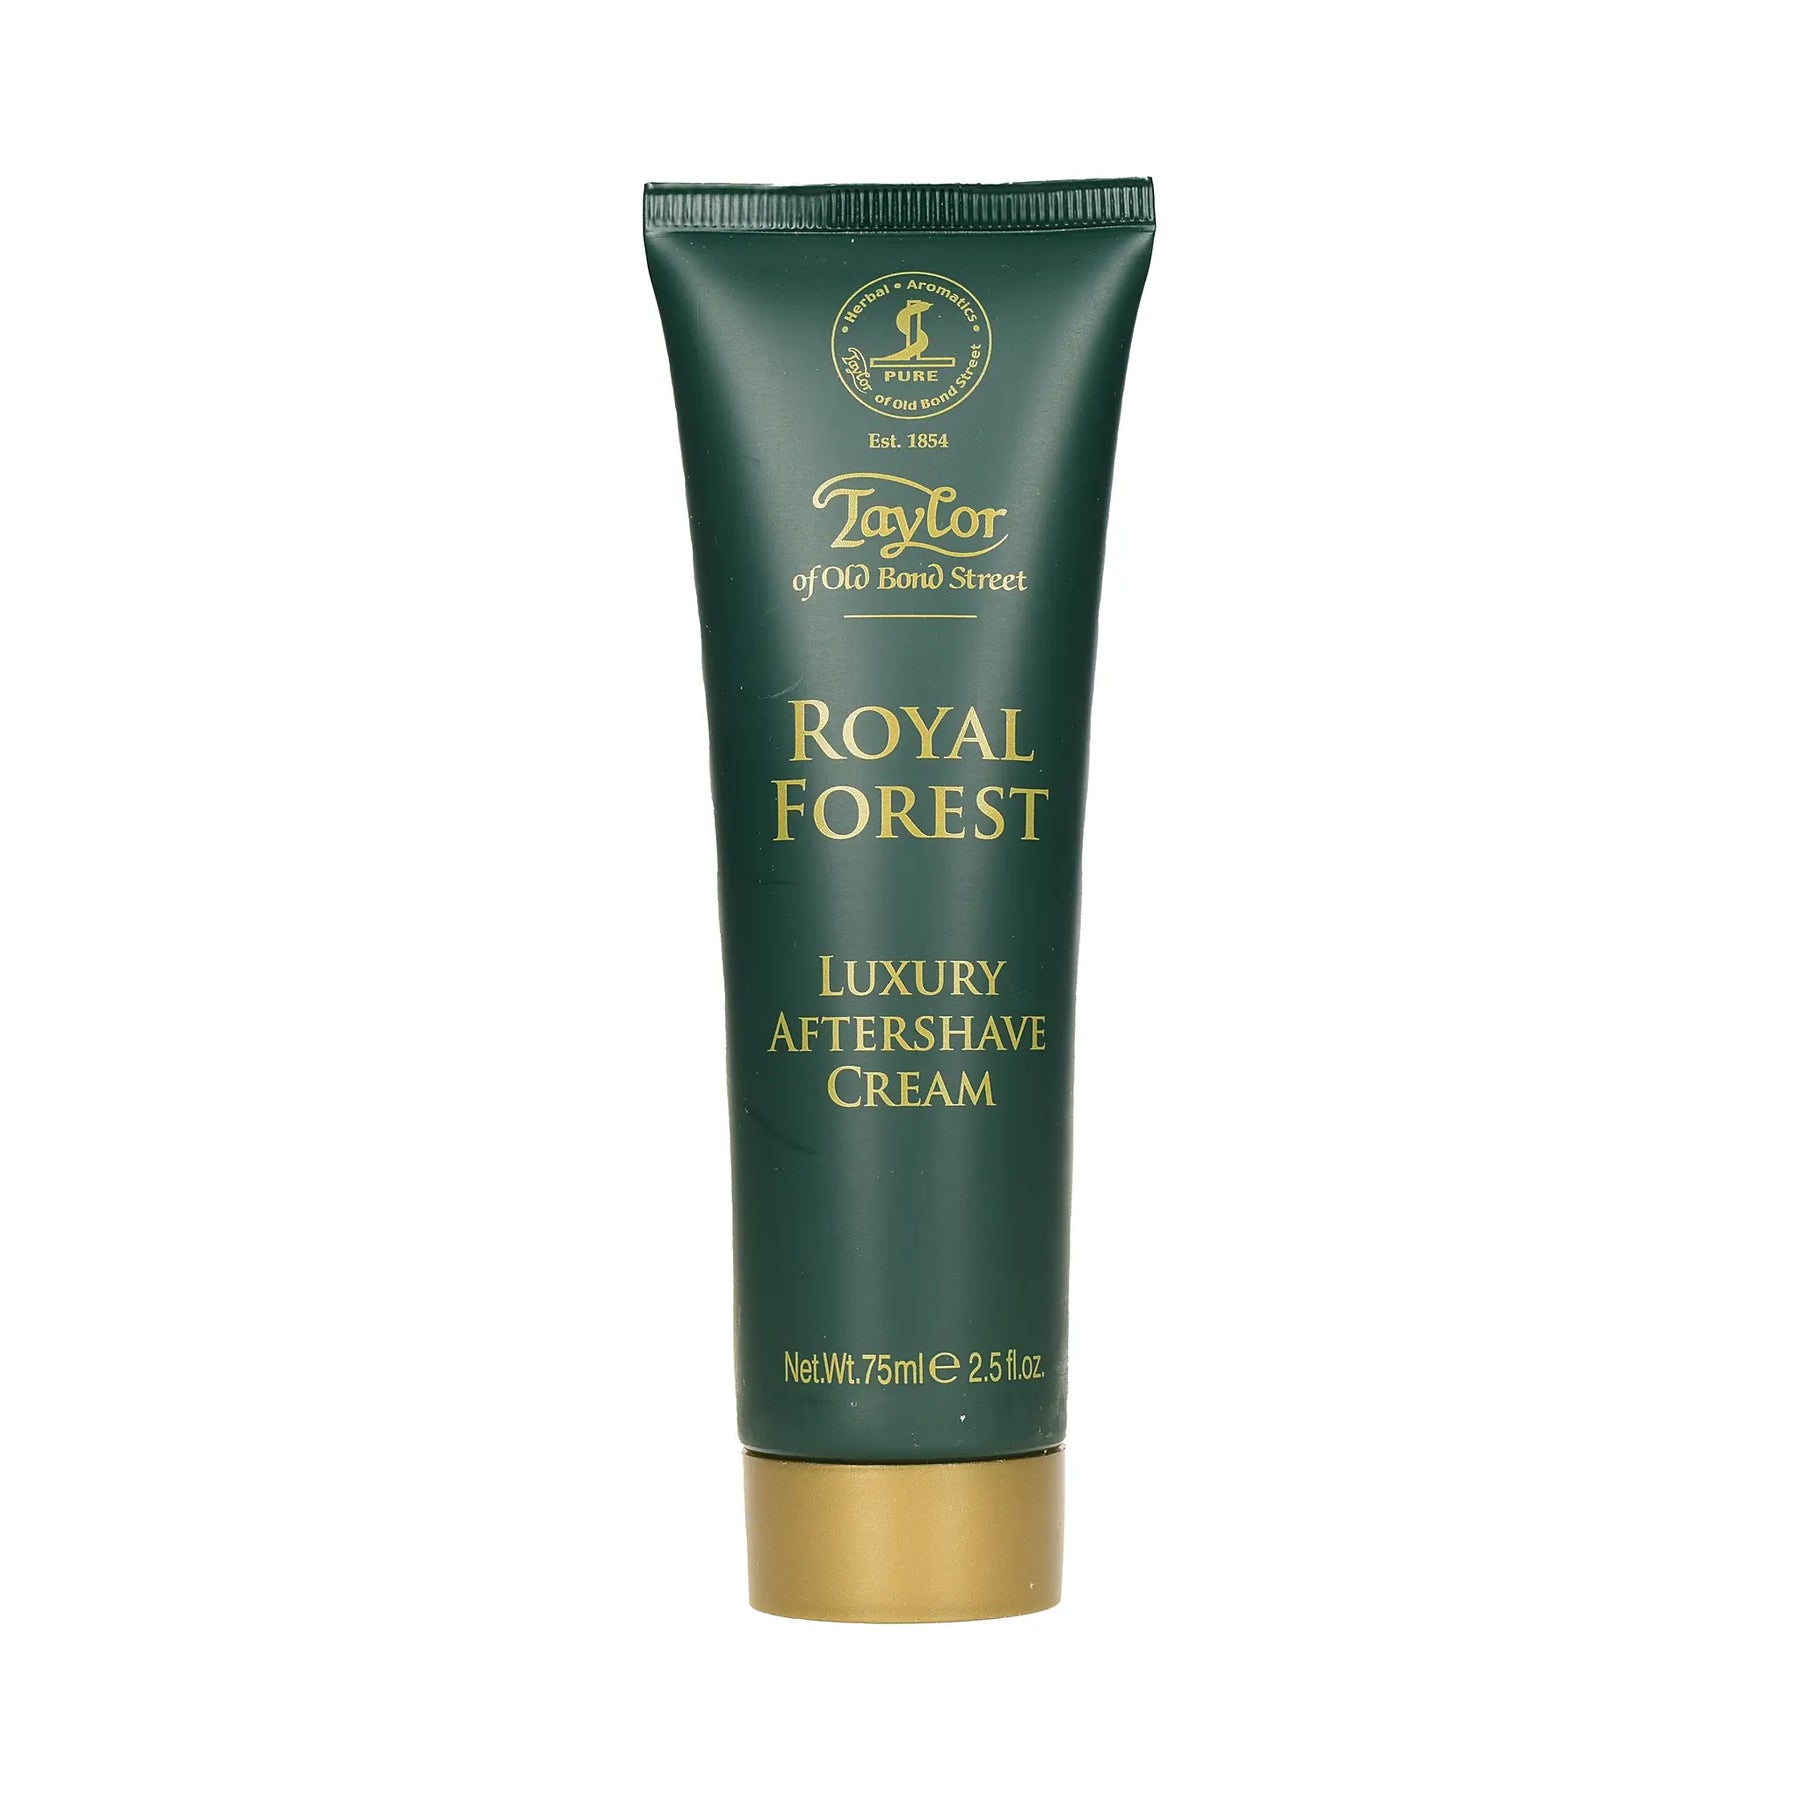 TAYLOR OF OLD BOND STREET Royal Forest Aftershave Cream, 75 ml – Tonsus | Rasiergele